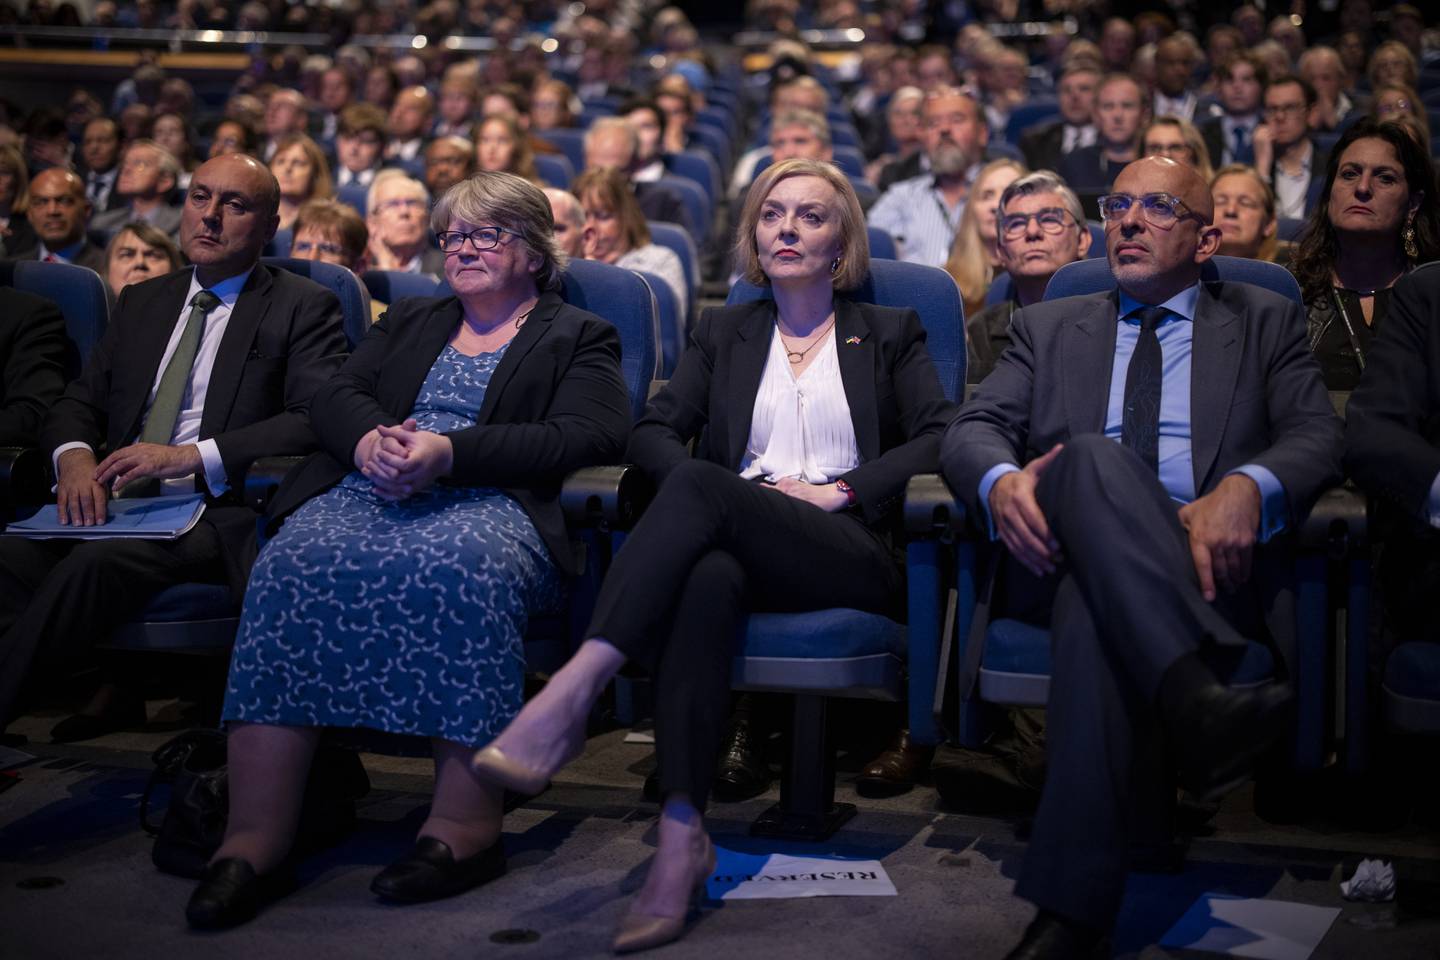 British Prime Minister LIz Truss, centre, and members of her Cabinet look on as Kwasi Kwarteng makes his keynote speech, which received lukewarm support. EPA